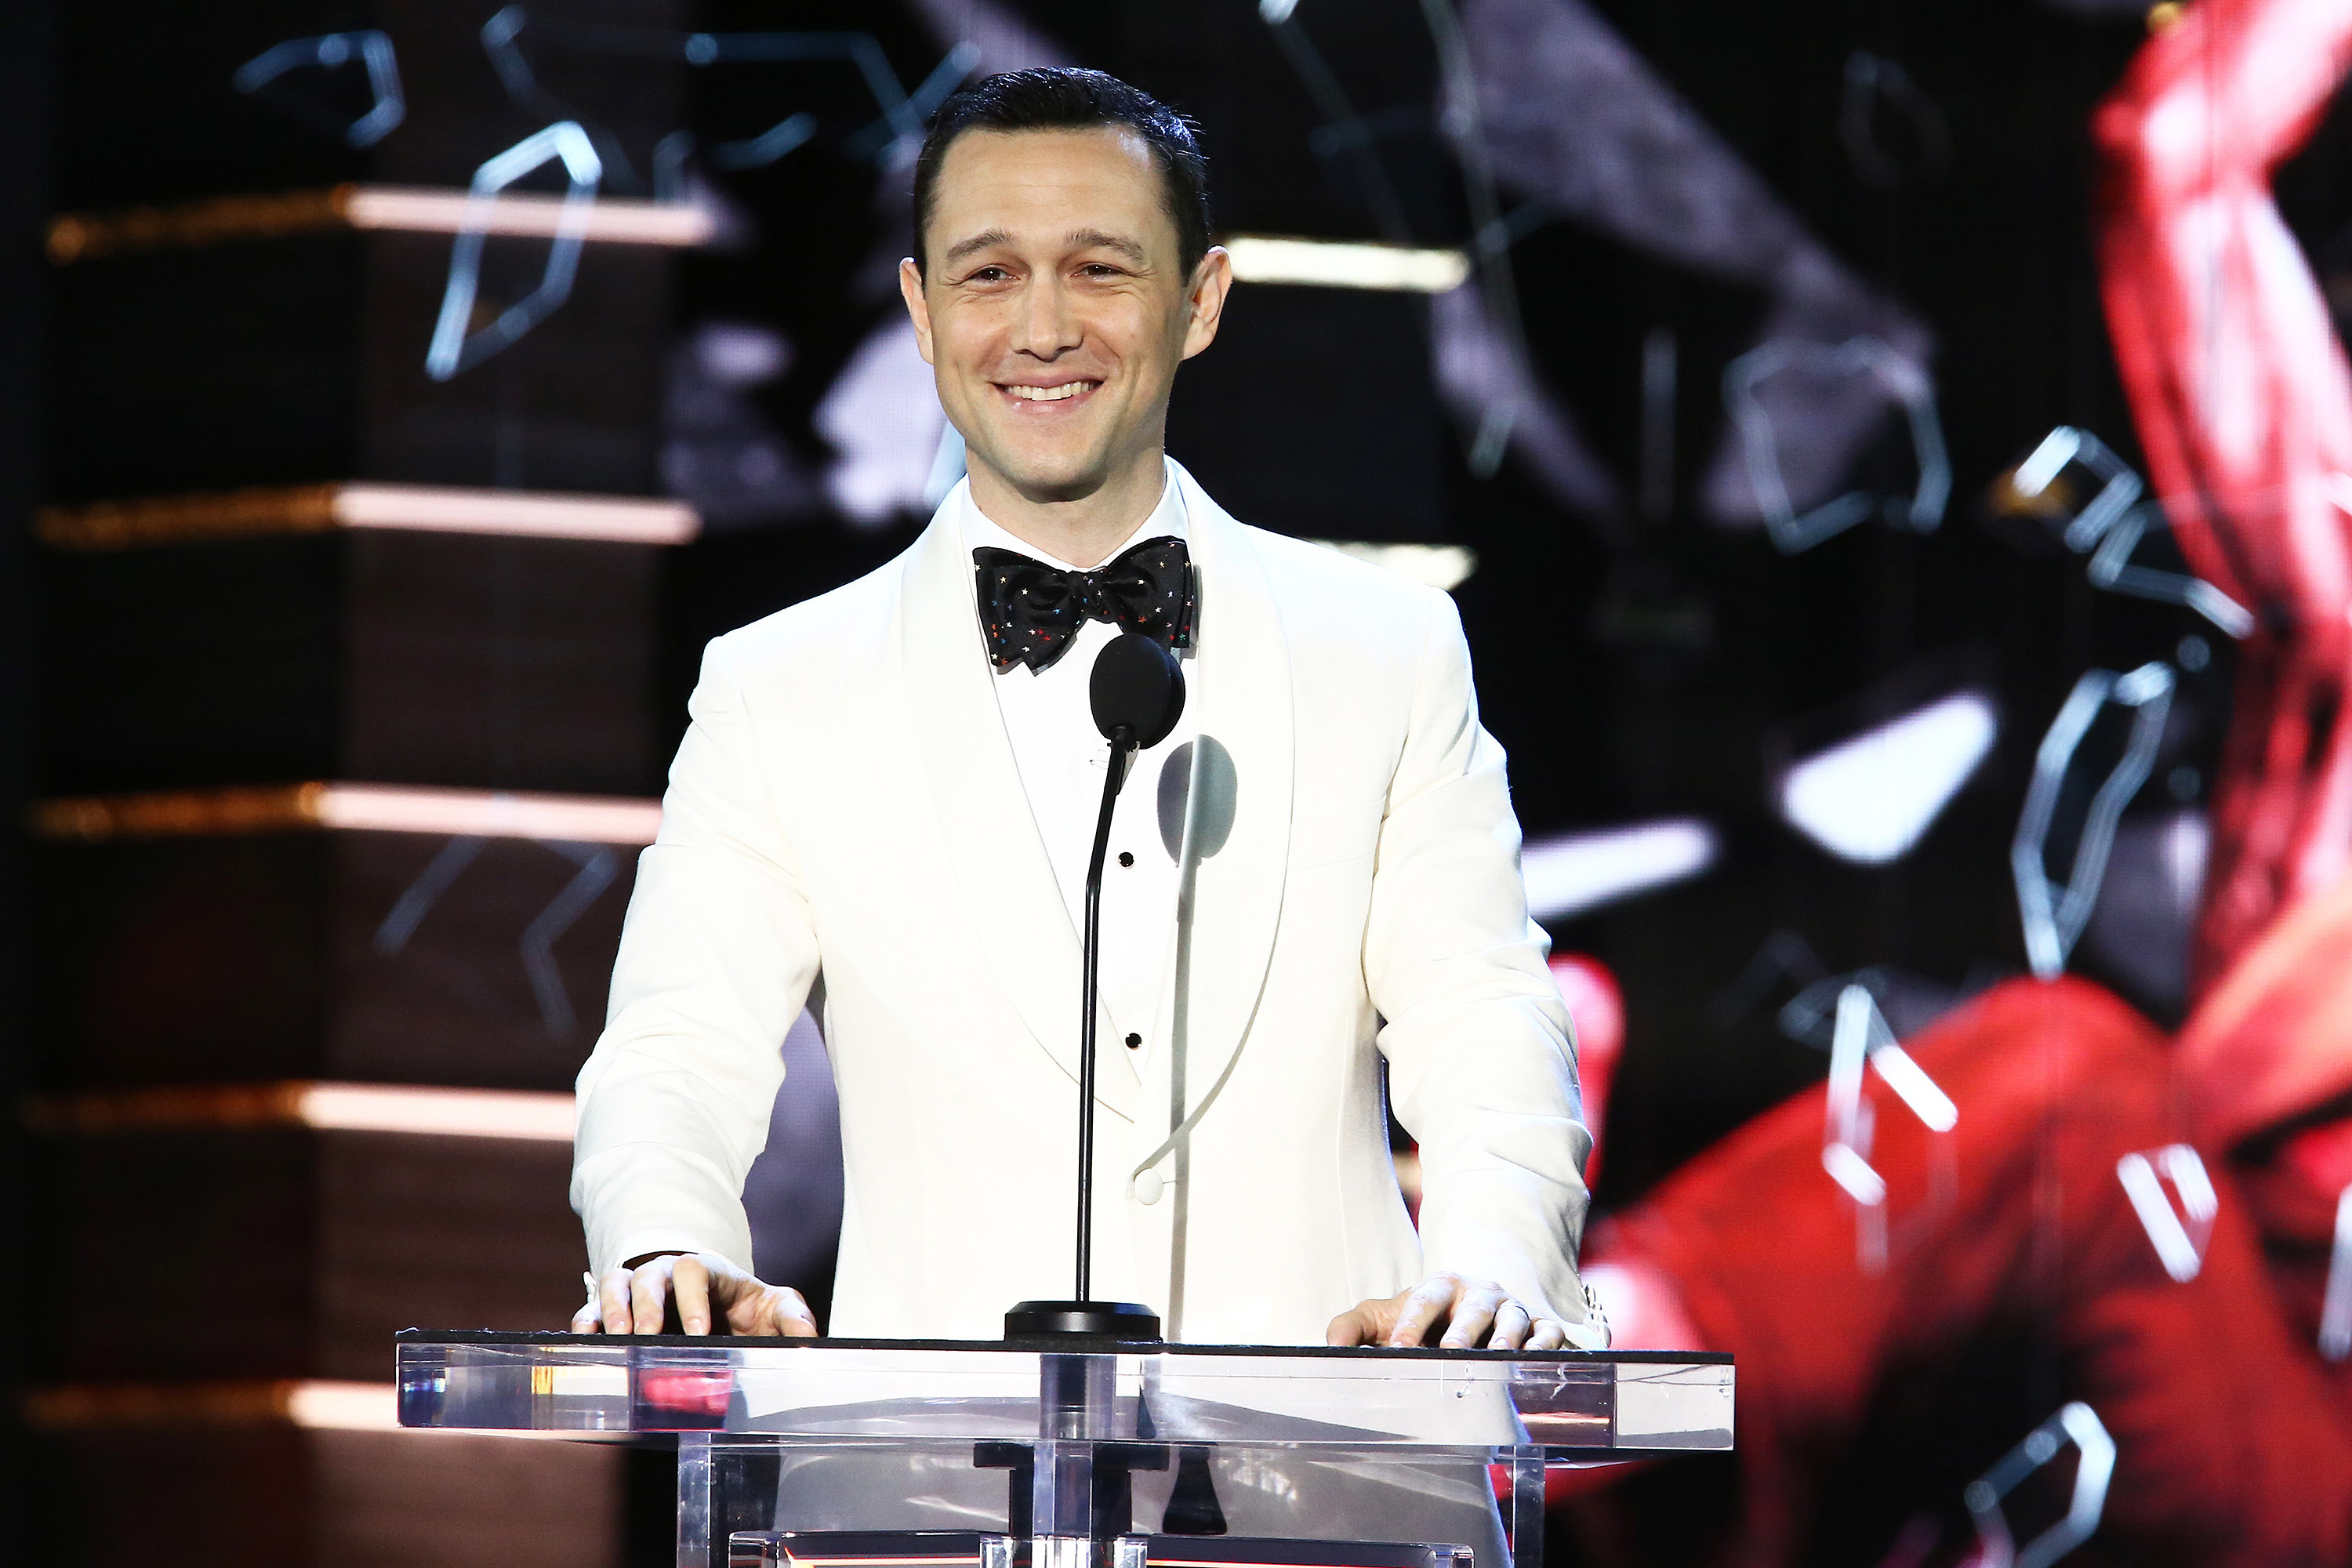 <p>Joseph Gordon-Levitt can sing, dance, bike, and wire-walk in movies, so it only figures he also learned how to tell jokes on stage and roast his "Looper" co-star, Bruce Willis. “Bruce, you were so good in 'The Sixth Sense<span>.' How did you pretend not to care while a 10-year-old acted circles around you?</span><span>” However, his best line was saved for Ed Norton: "Who could forget Ed as<span> '</span>The Incredible Hulk'? The Avengers franchise, that’s who. Let’s give him a round of applause. I know Mark Ruffalo does every night.”</span></p><p>You may also like: <a href='https://www.yardbarker.com/entertainment/articles/the_25_greatest_opening_lines_to_songs_010224/s1__39107121'>The 25 greatest opening lines to songs</a></p>